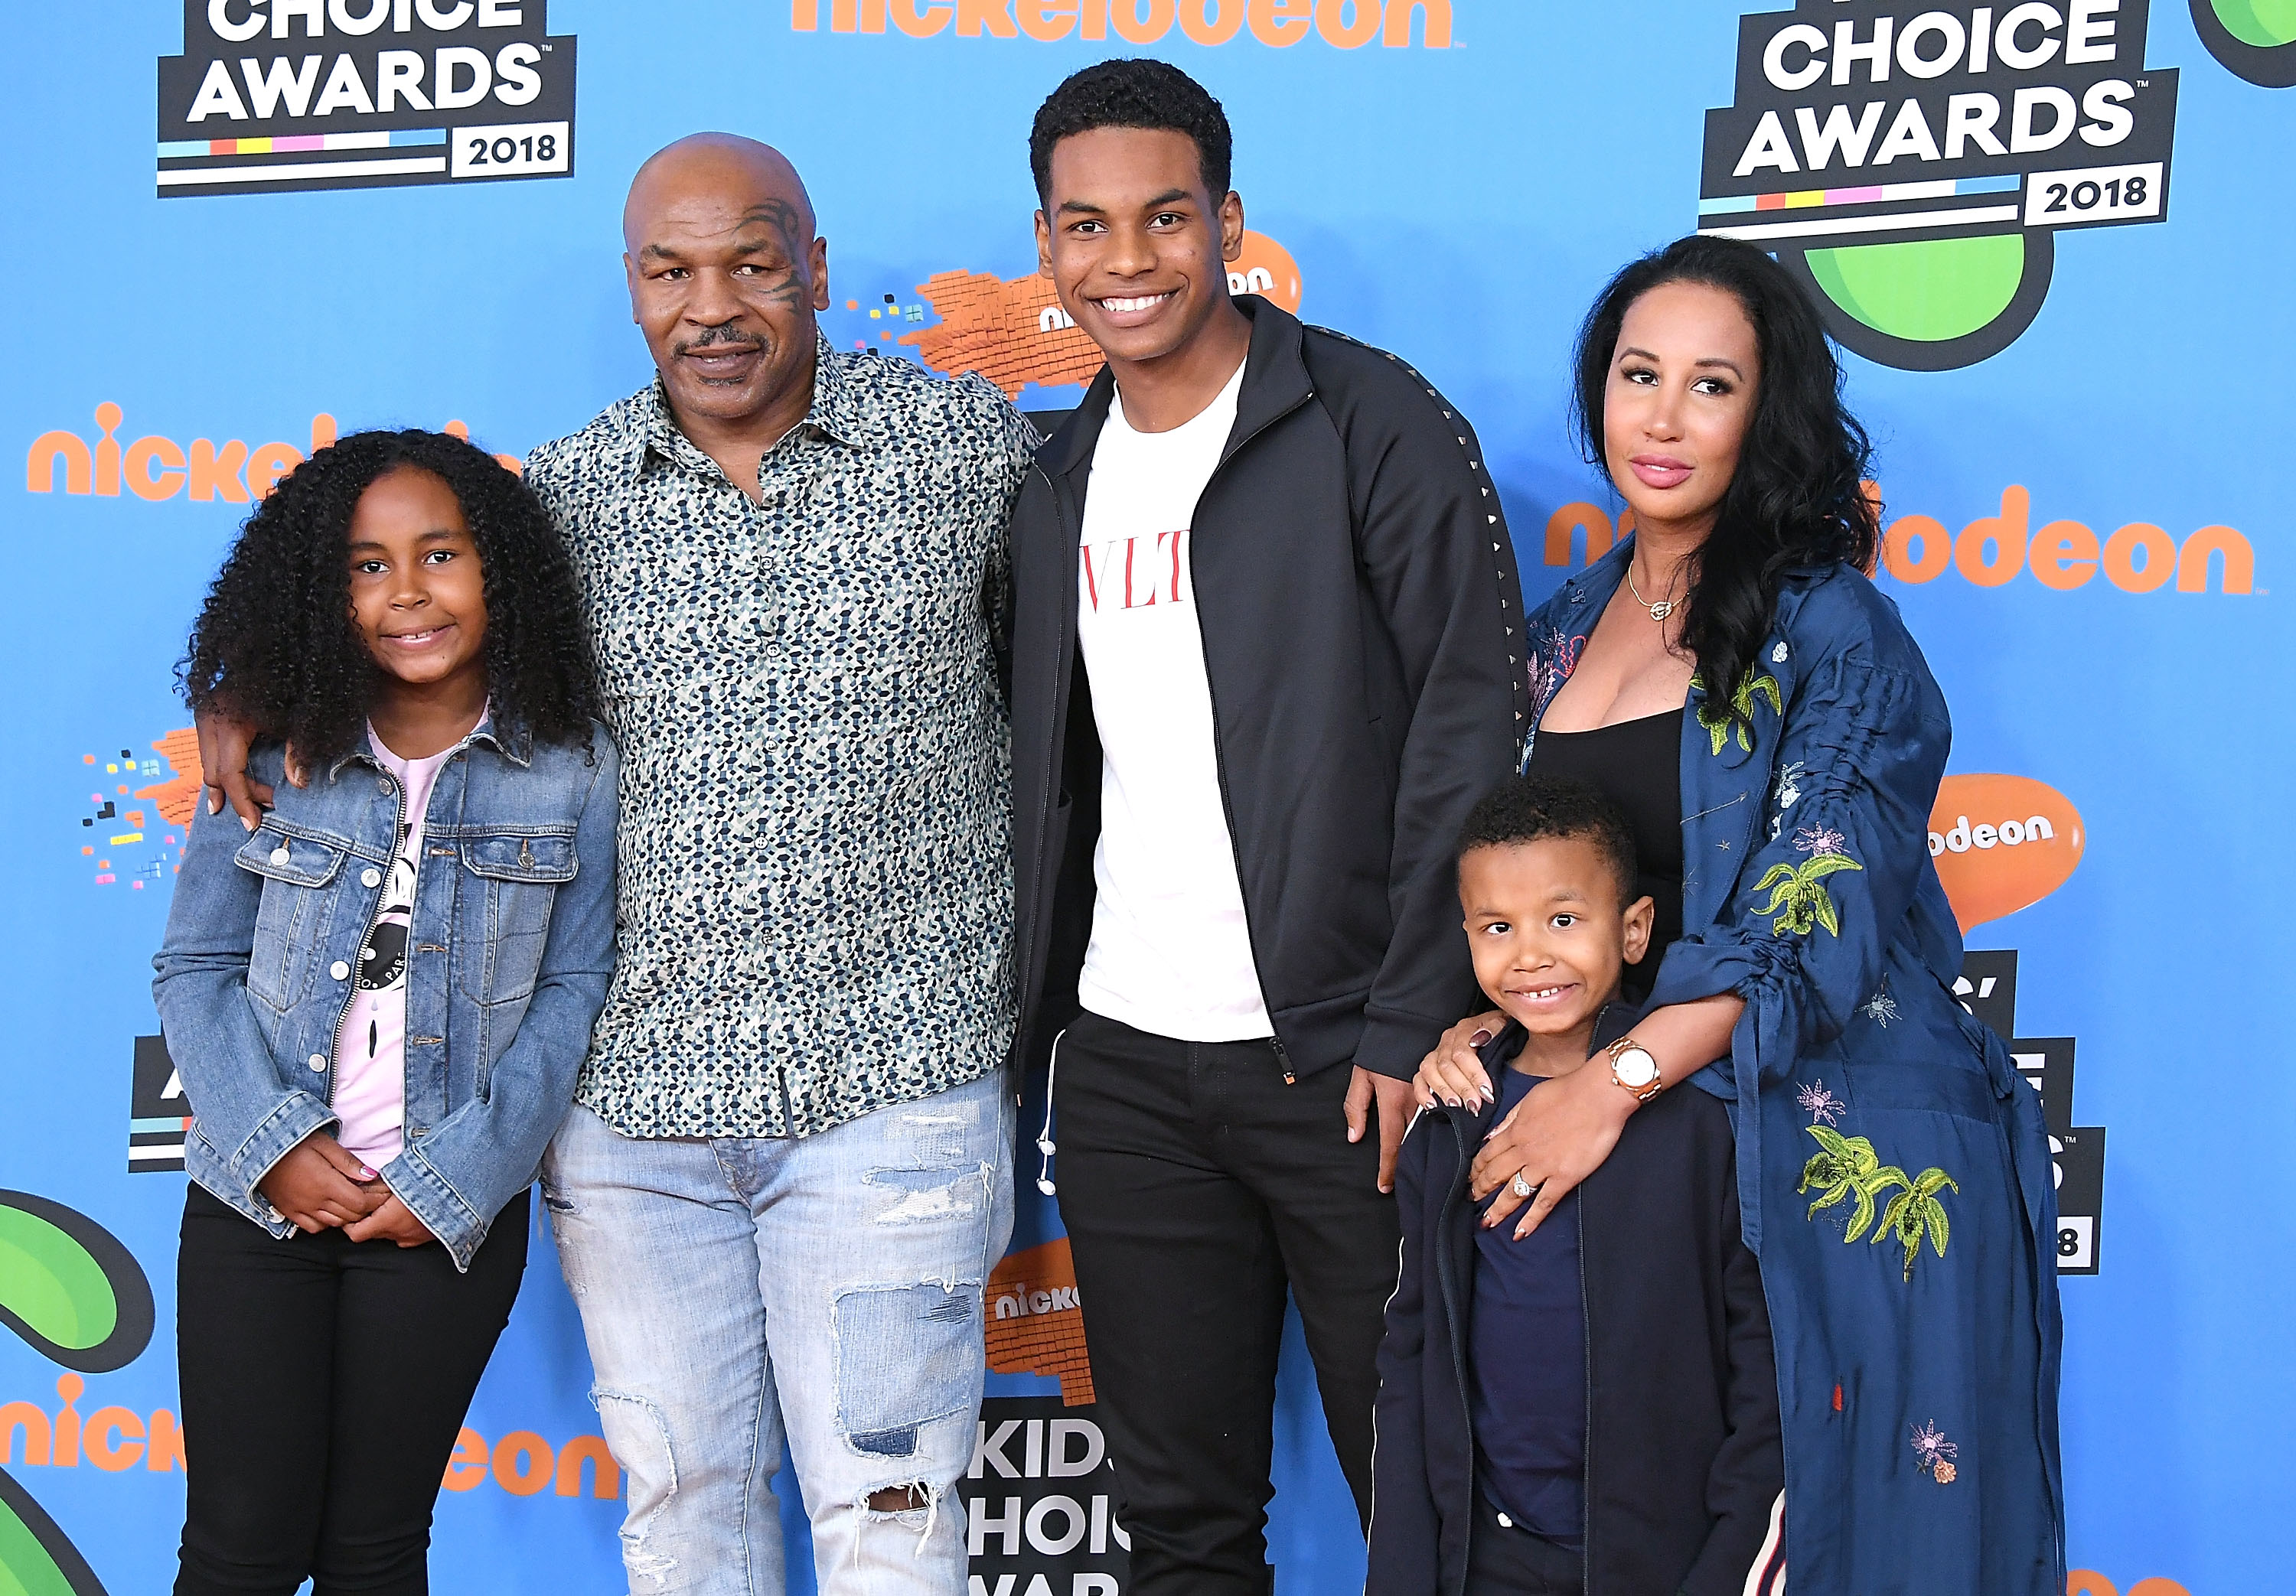 Mike Tyson's arrival at Nickelodeon's 2018 Kids' Choice Awards, hosted at The Forum in Inglewood, California, on March 24, 2018 | Source: Getty Images